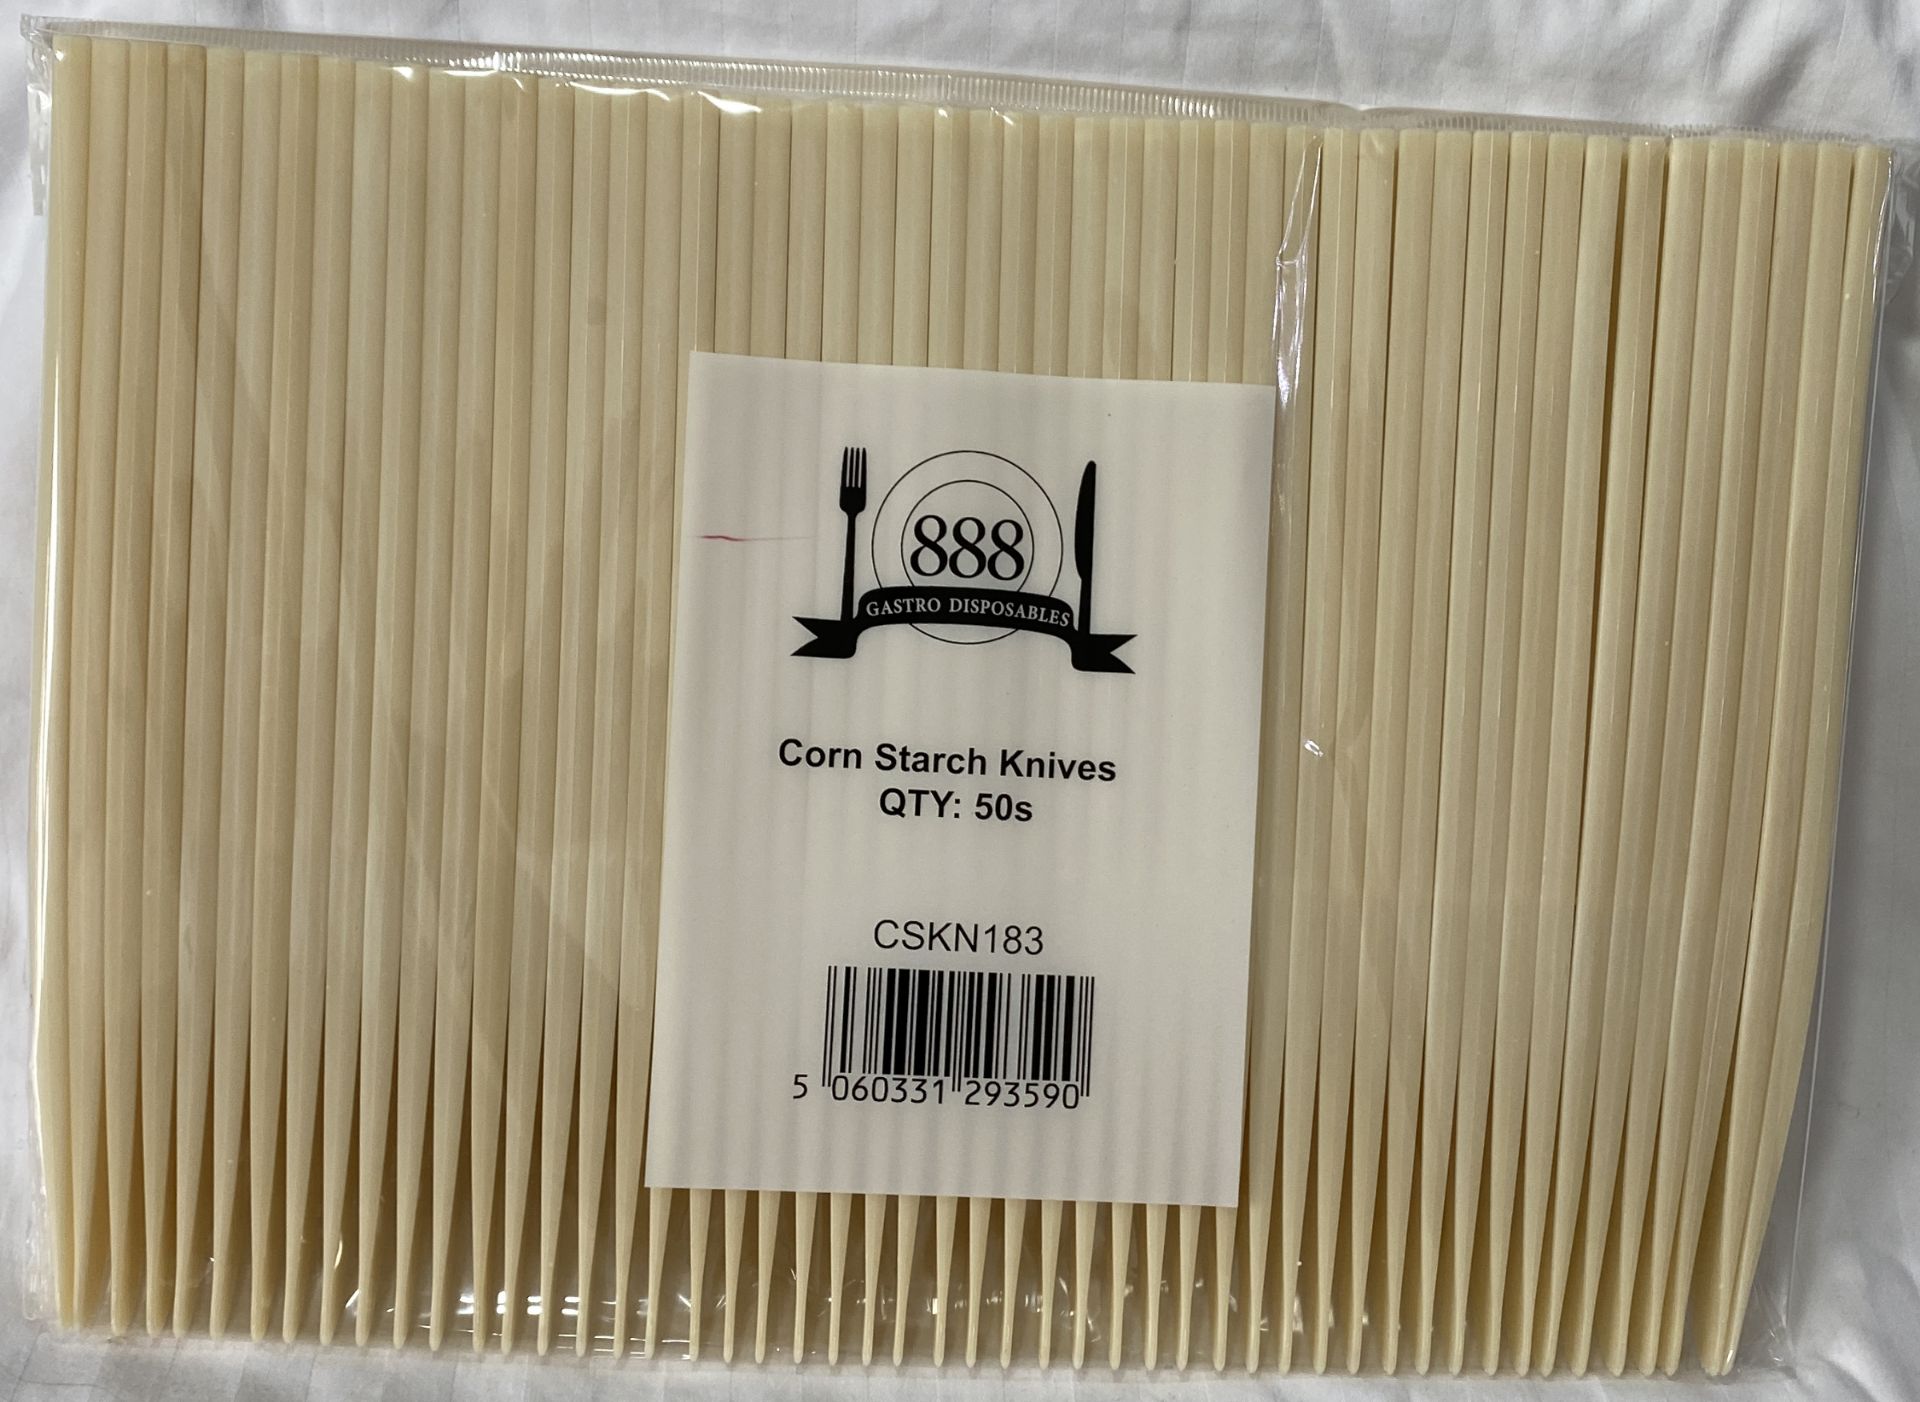 2 x Boxes of 1000 Corn Starch Knives by 888 Gastro Disposables | DSP15 - Image 2 of 3